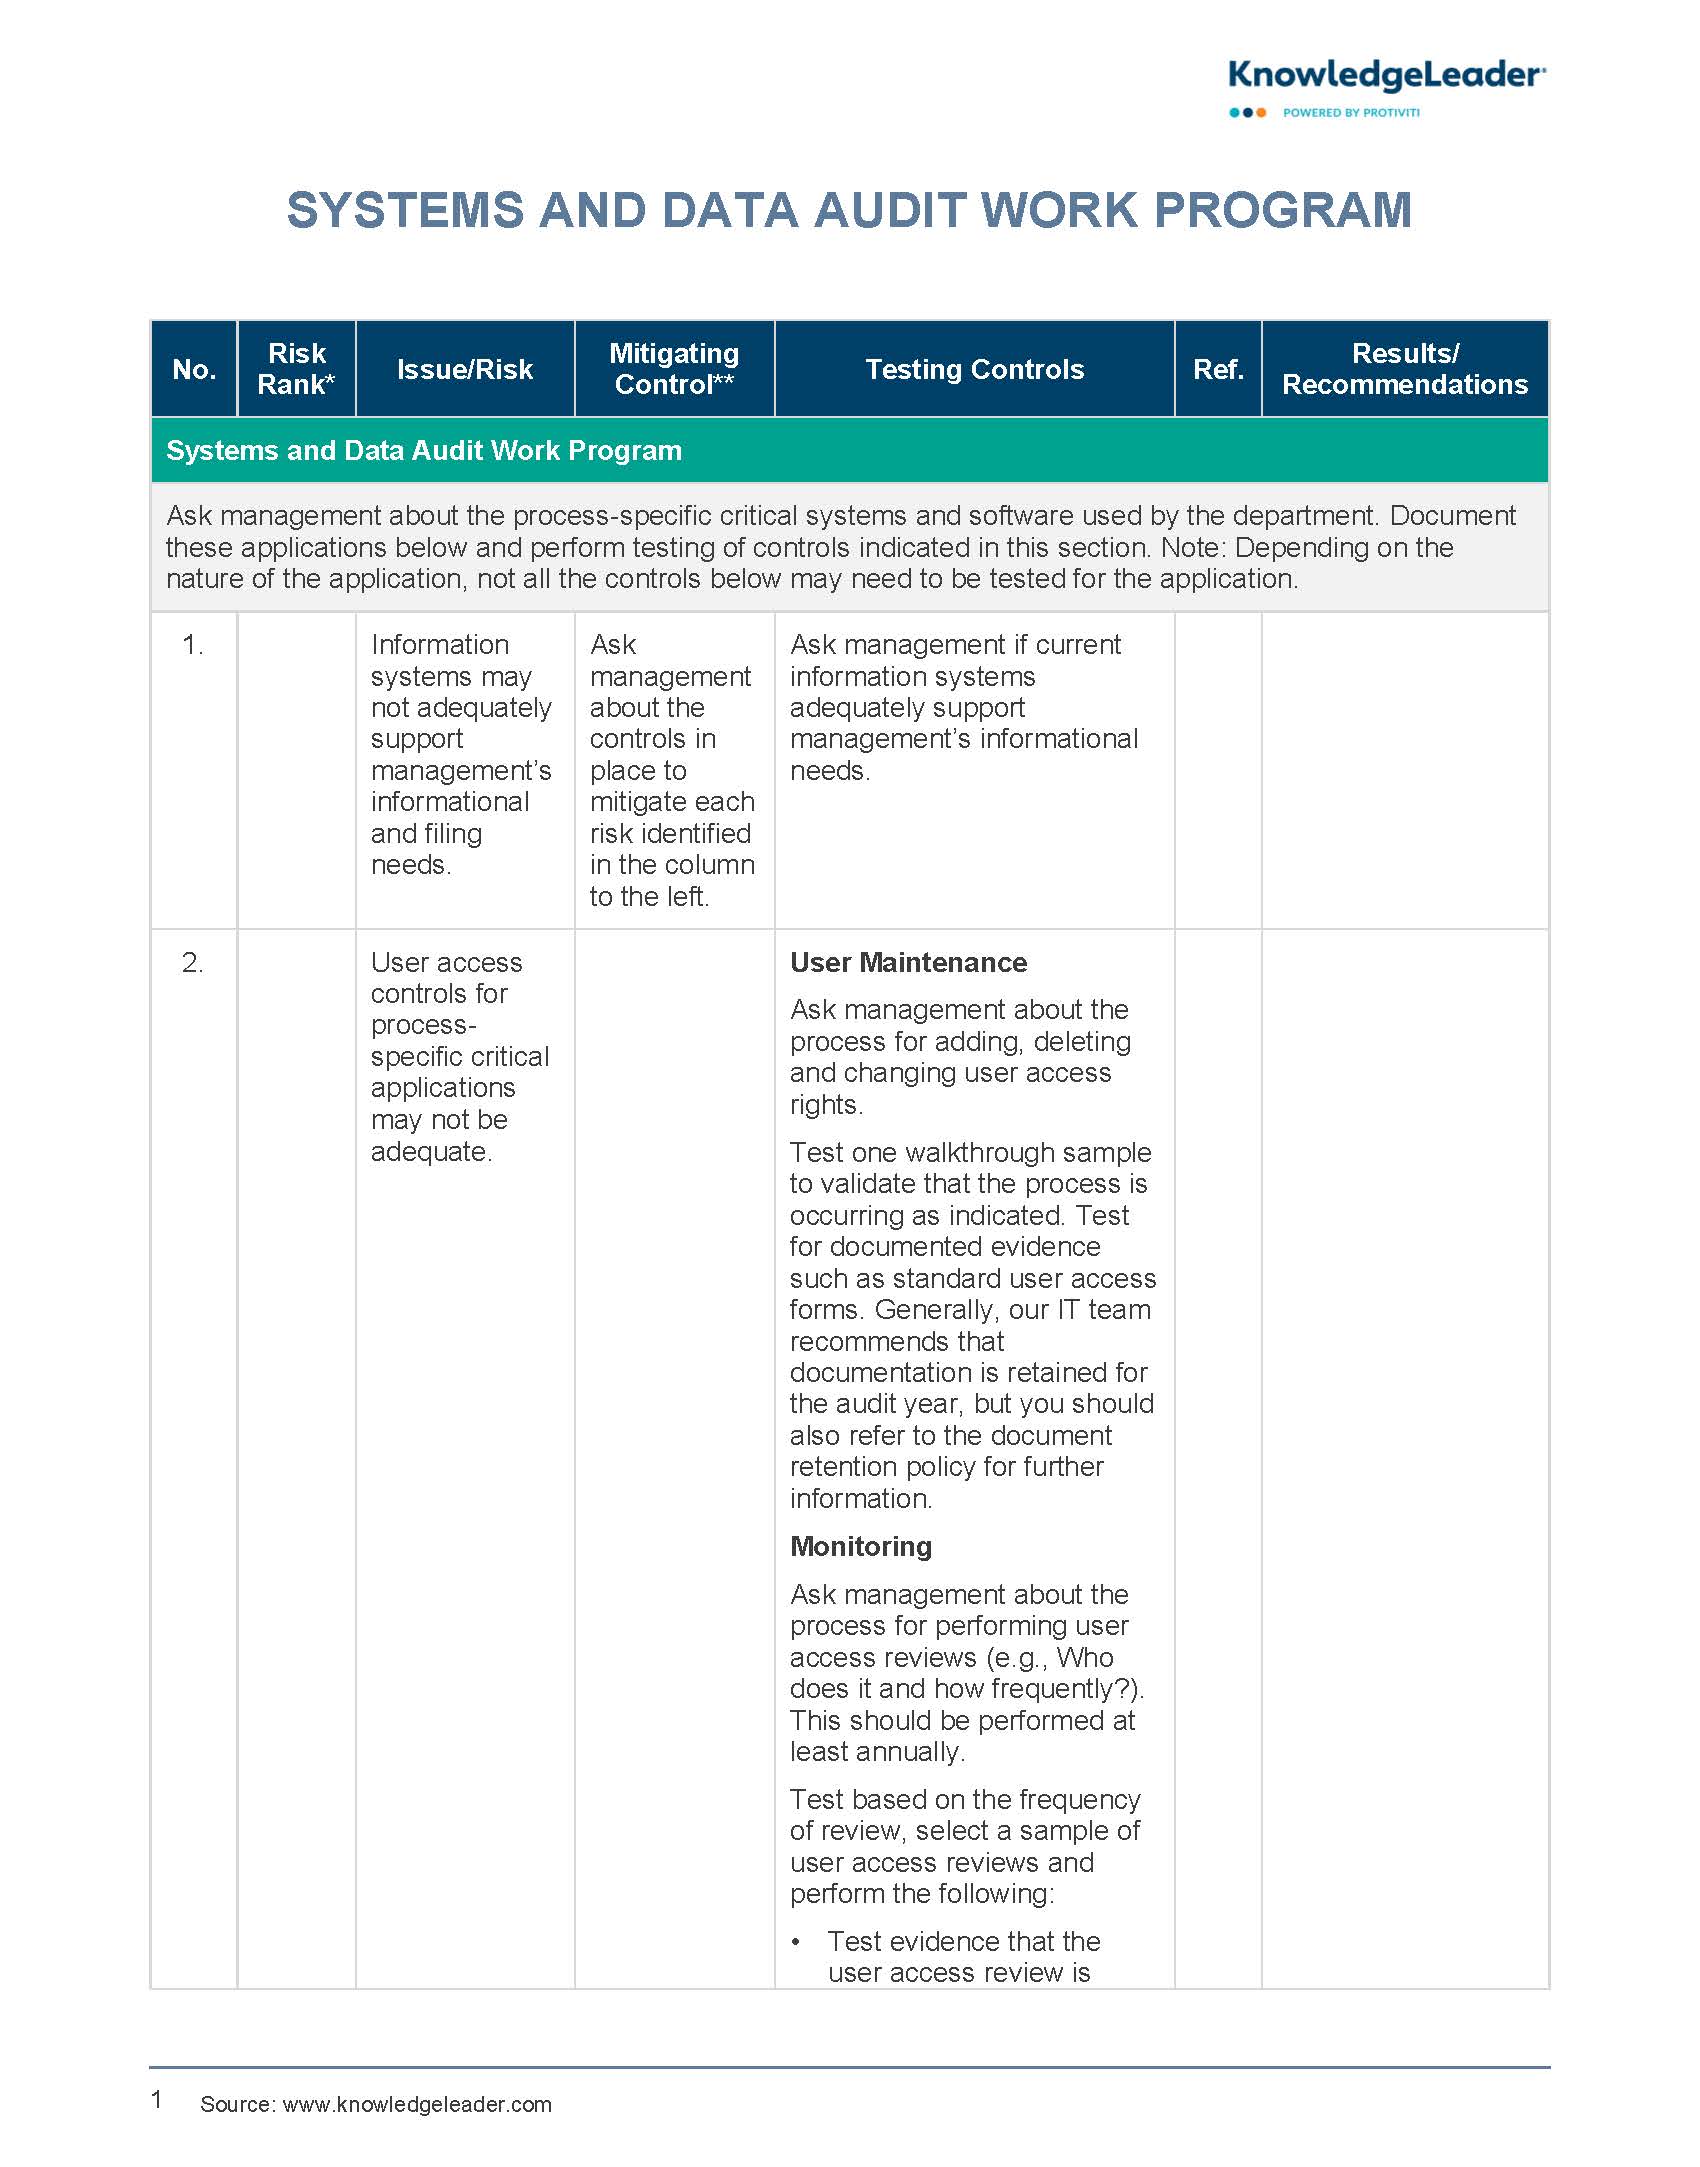 Screenshot of the first page of Systems and Data Audit Work Program